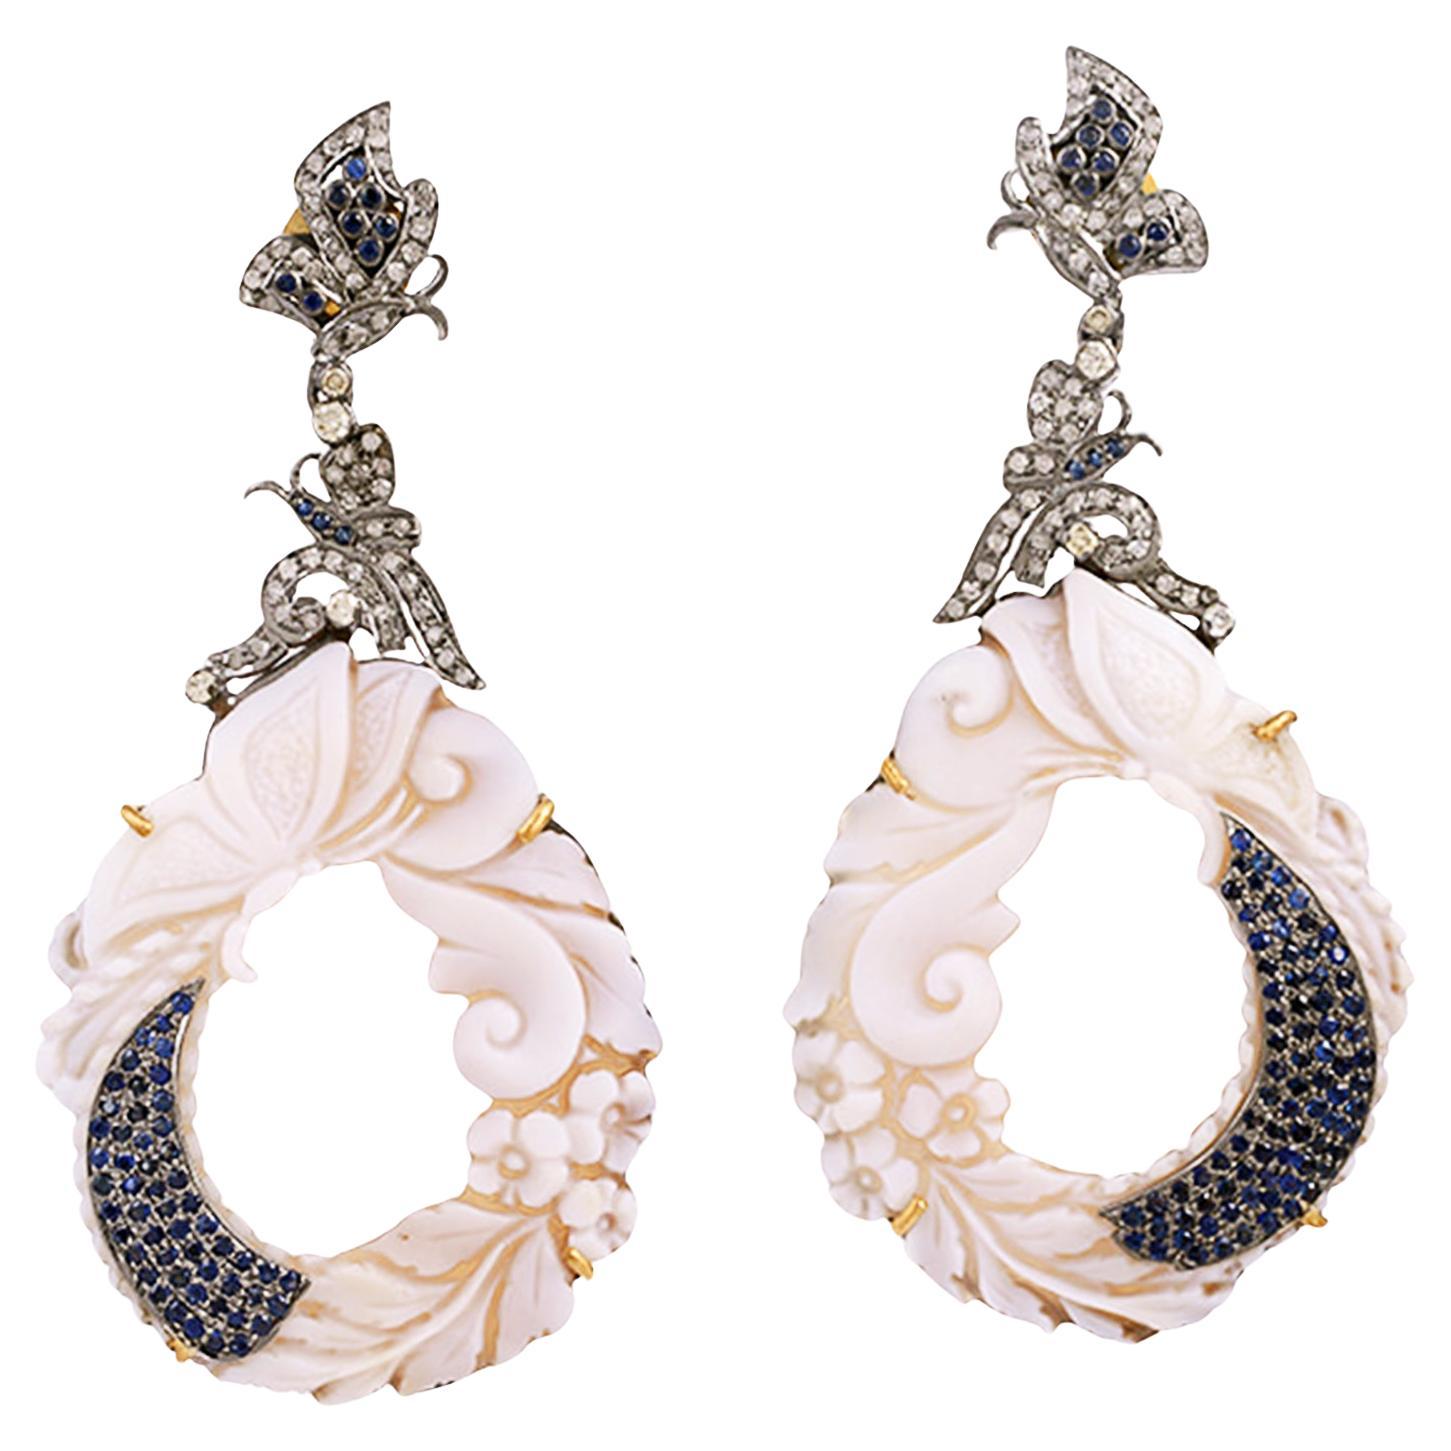 Carved Agate Cameo Dangle Earrings With Sapphires and Diamonds 49.20 Carats For Sale